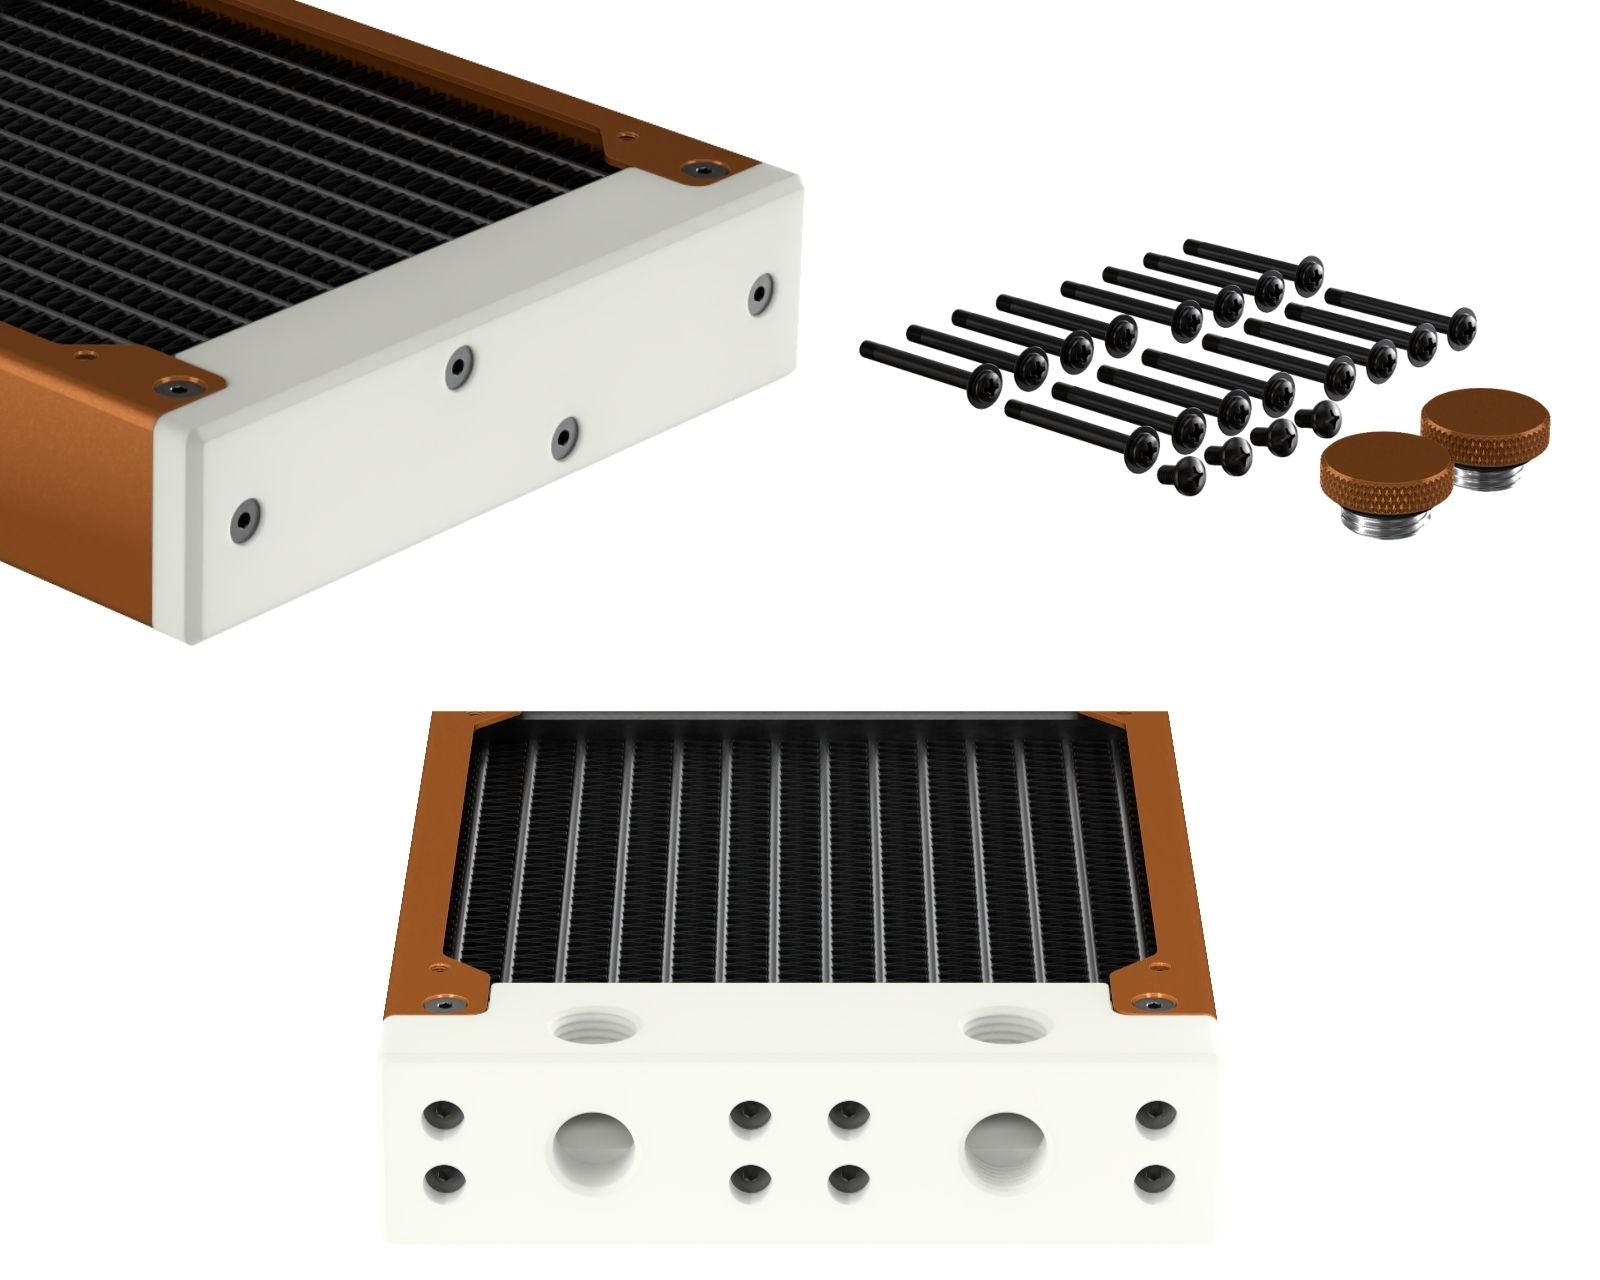 PrimoChill 480SL (30mm) EXIMO Modular Radiator, White POM, 4x120mm, Quad Fan (R-SL-W48) Available in 20+ Colors, Assembled in USA and Custom Watercooling Loop Ready - Copper